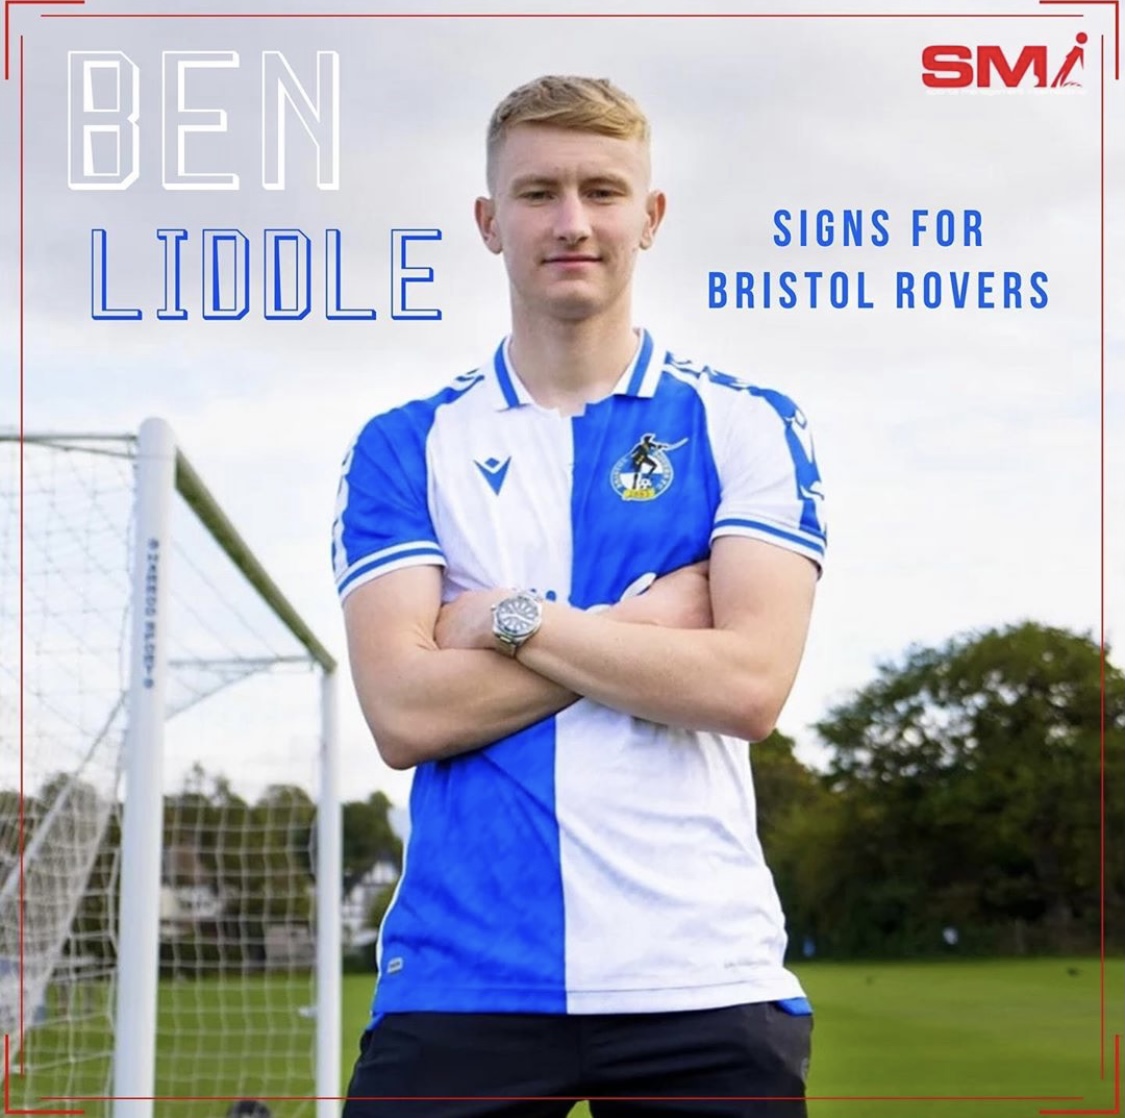 Ben Liddle signs for Bristol Rovers